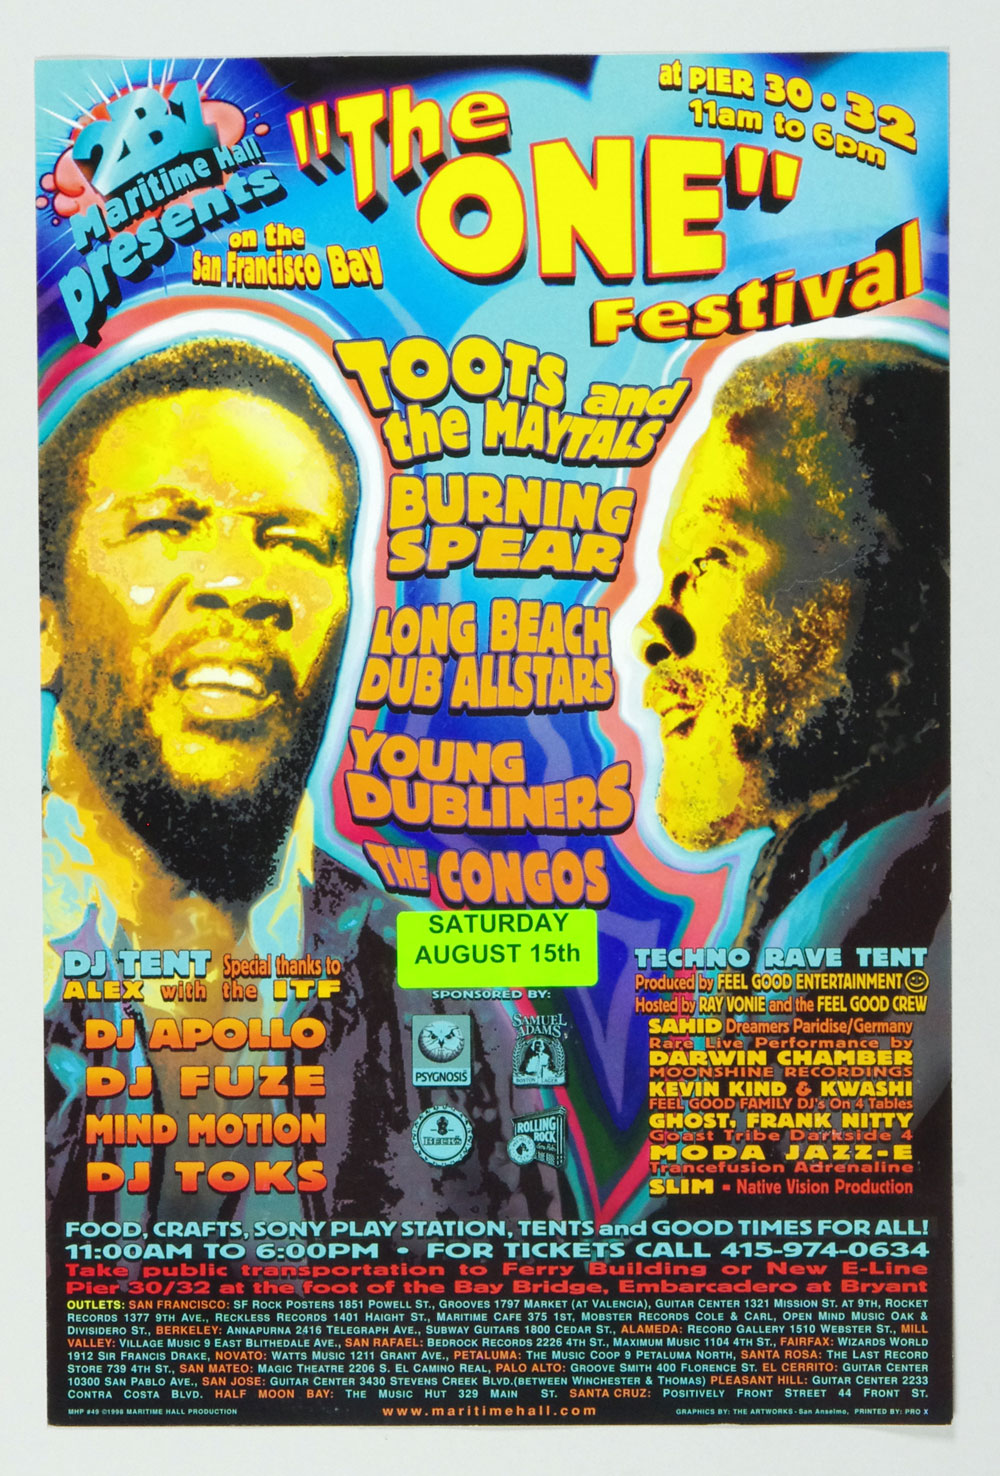 Maritime Hall 1998 Aug 15 Poster Toots and the Maytals Burning Spears